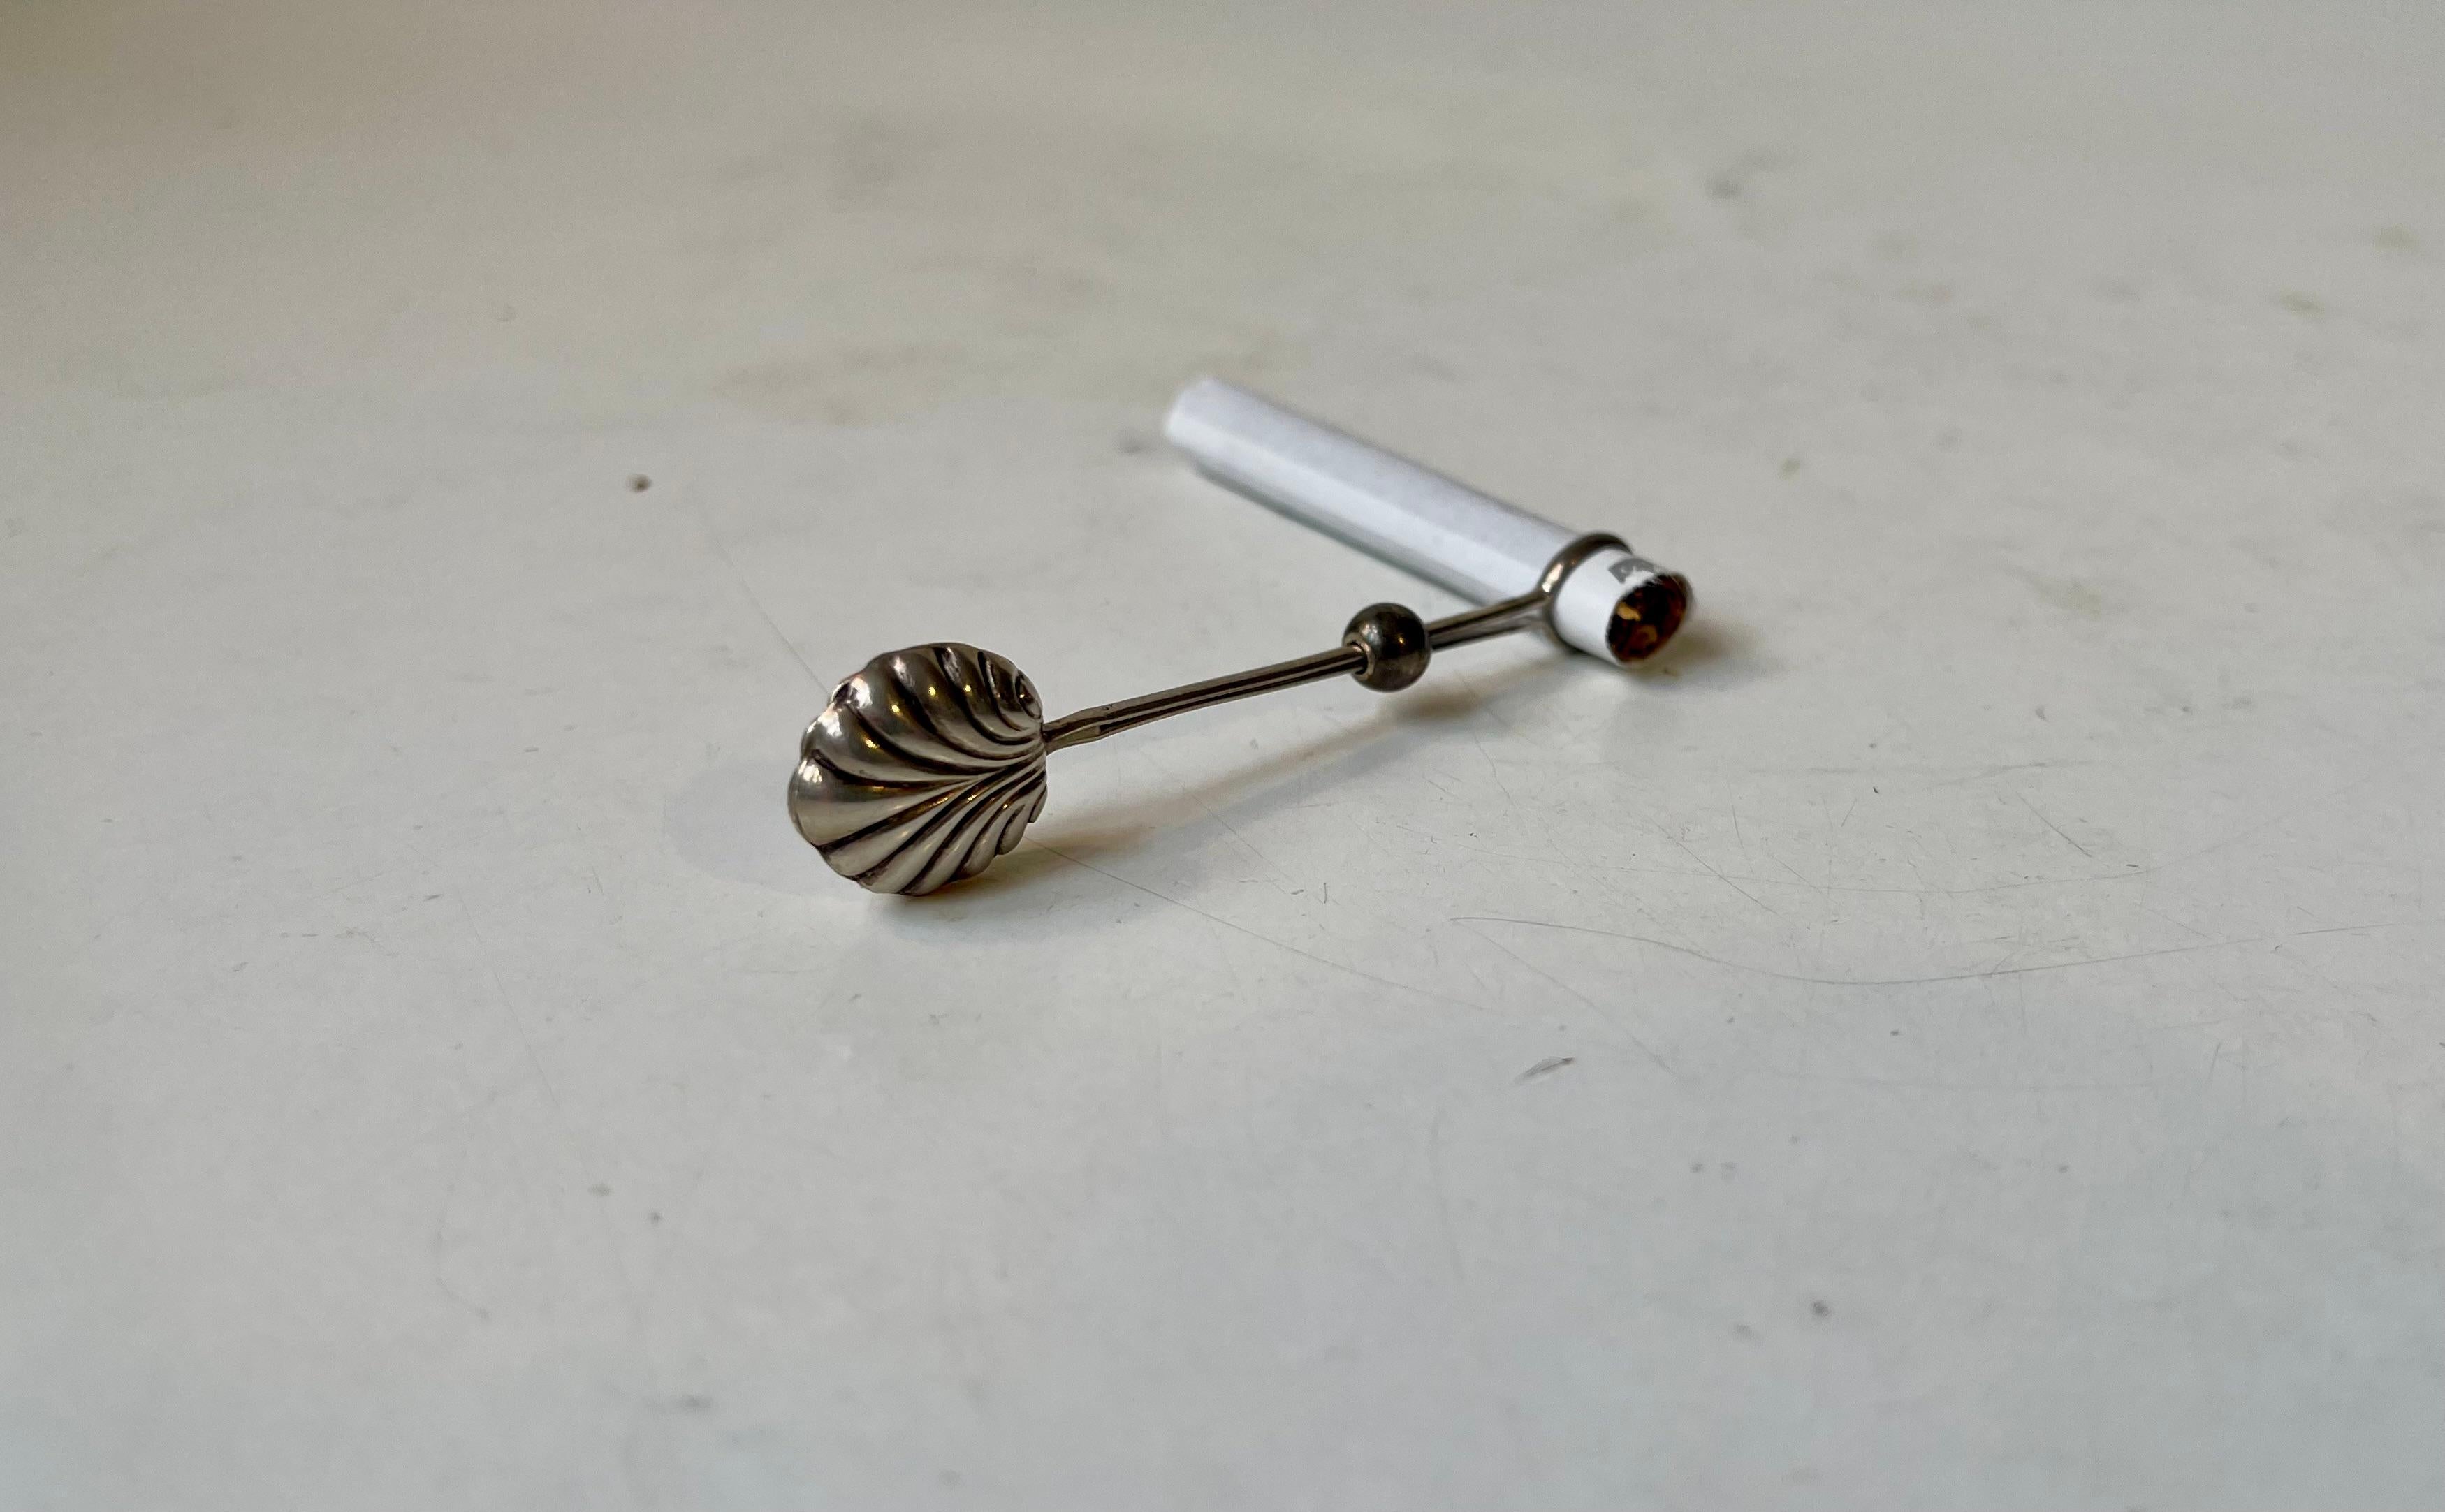 Elegant 1920s ladies cigarette holder in 830/1000 silver. It features an Art Deco stylized clam shell to its top and a tightening ball to keep in place the cigarette. Unidentified Danish silversmith in the style of Hans Hansen. Marked 830 and has